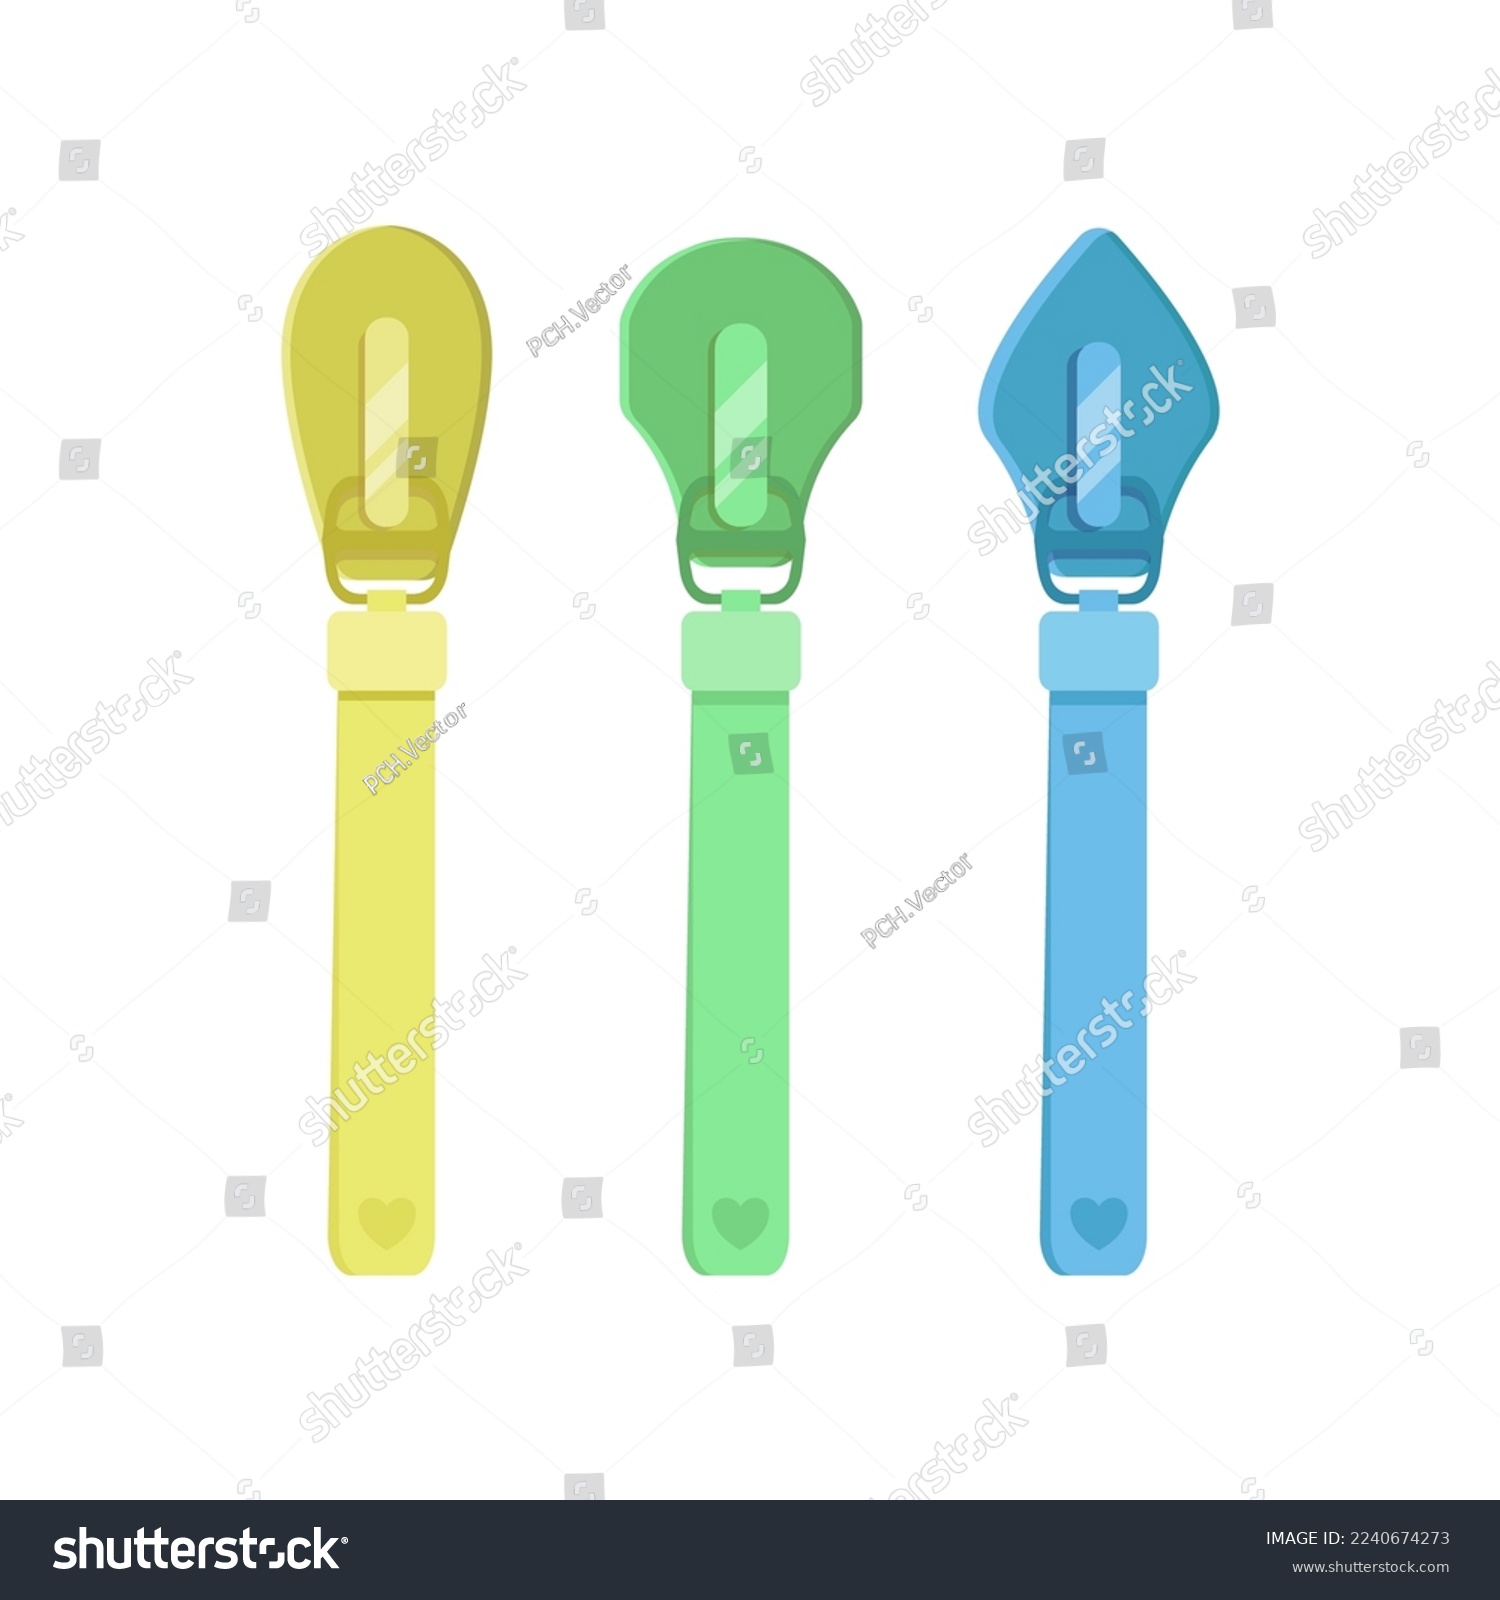 SVG of Modern colorful zip sliders for clothes cartoon illustration. Zipper pullers with tassels for sportswear or leather backpacks. Fashion, metal accessories concept svg